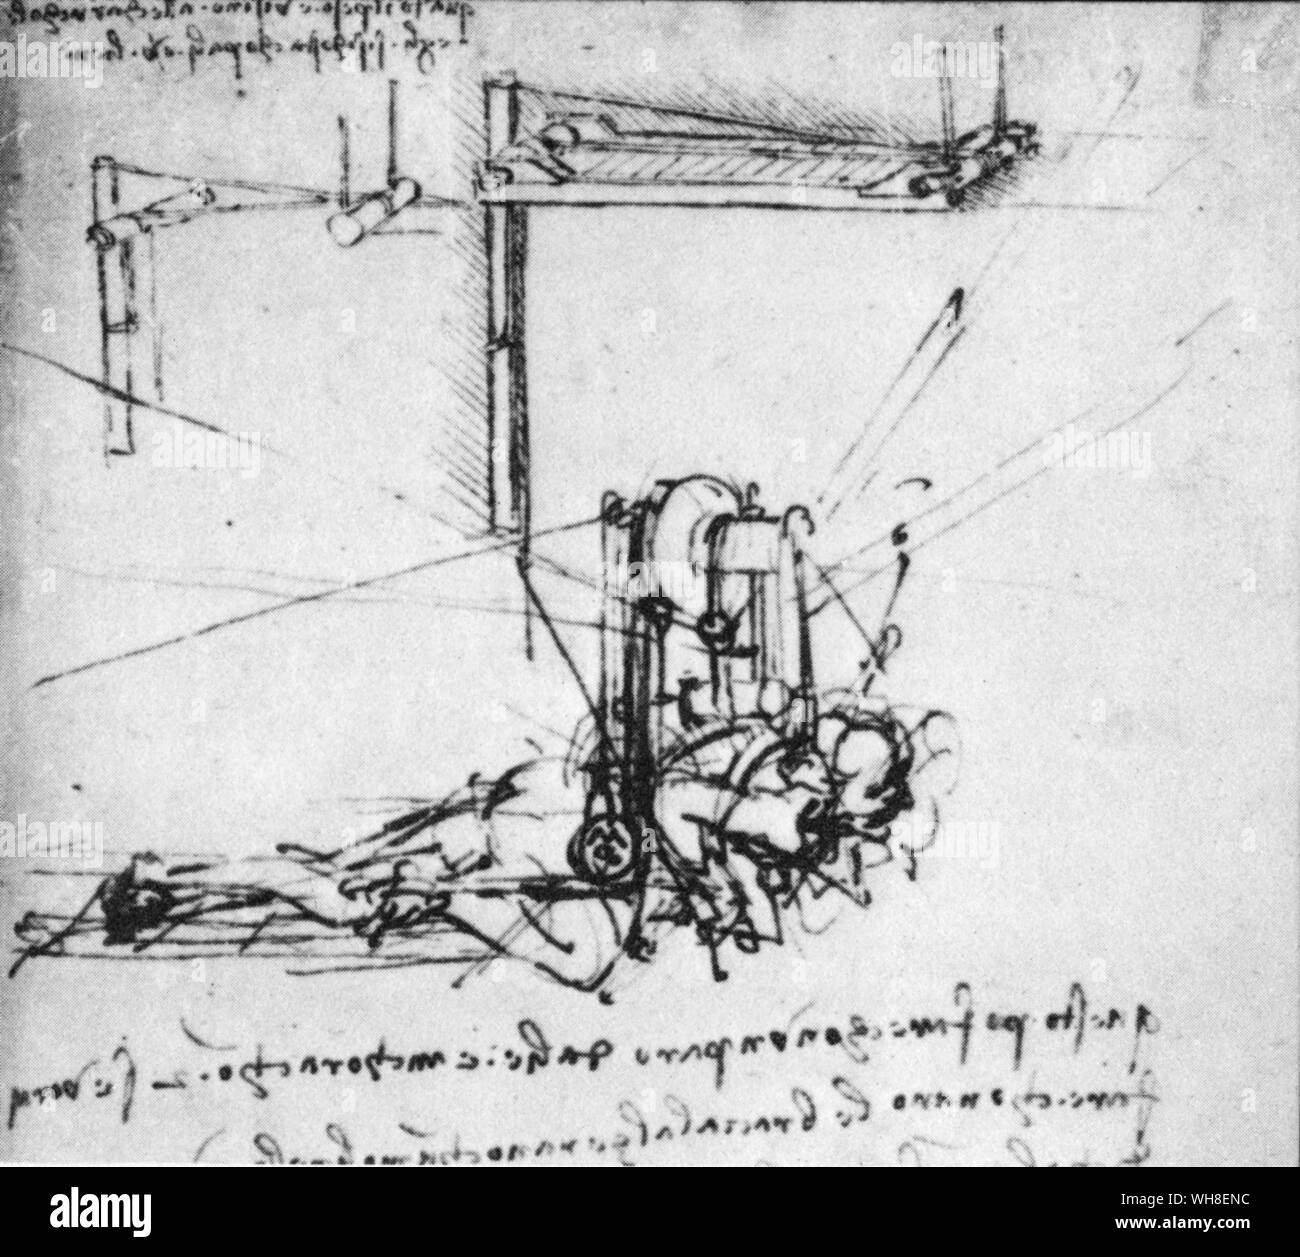 A rudder like a bird's tail is an interesting addition to another ornithopter design of 1486-90. The sketch shows how the head harness fits. This apparatus also has hand-operated cranks to help on the down-beat. In the notes accompanying the vivid drawing, Leonardo tells how an onithopter can be made with one pair of wings or with two. Leonardo da Vinci (1452-1519) was an Italian Renaissance architect, musician, anatomist, inventor, engineer, sculptor, geometer and painter. . . Stock Photo